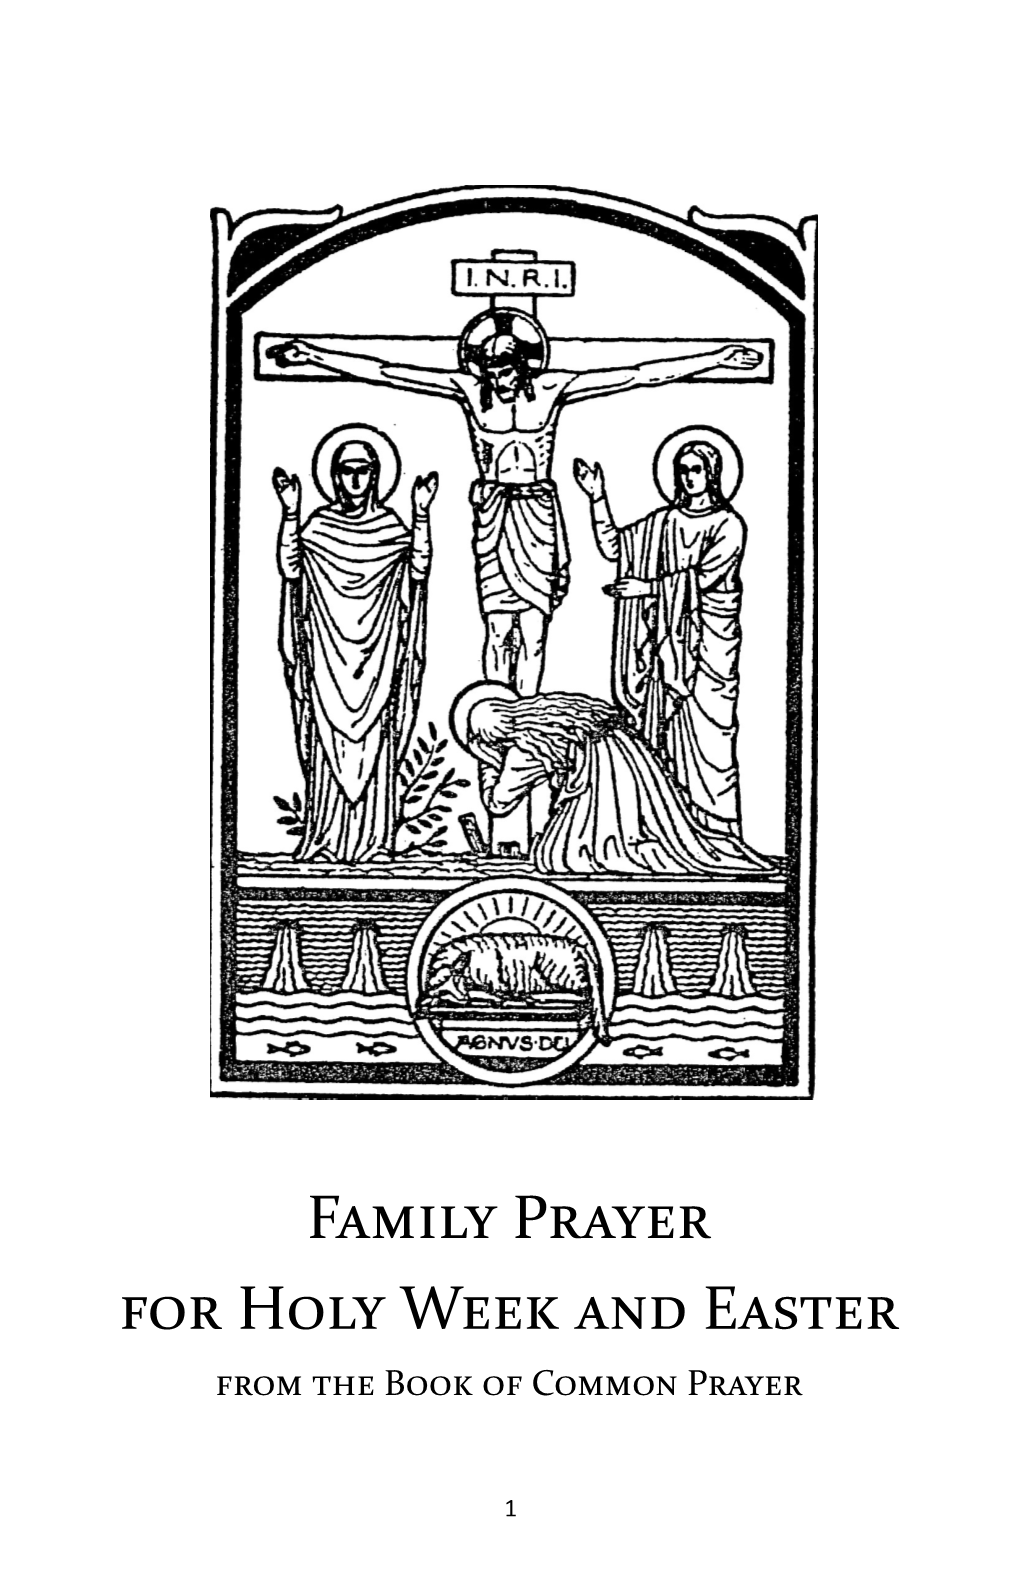 Family Prayer for Holy Week and Easter from the Book of Common Prayer